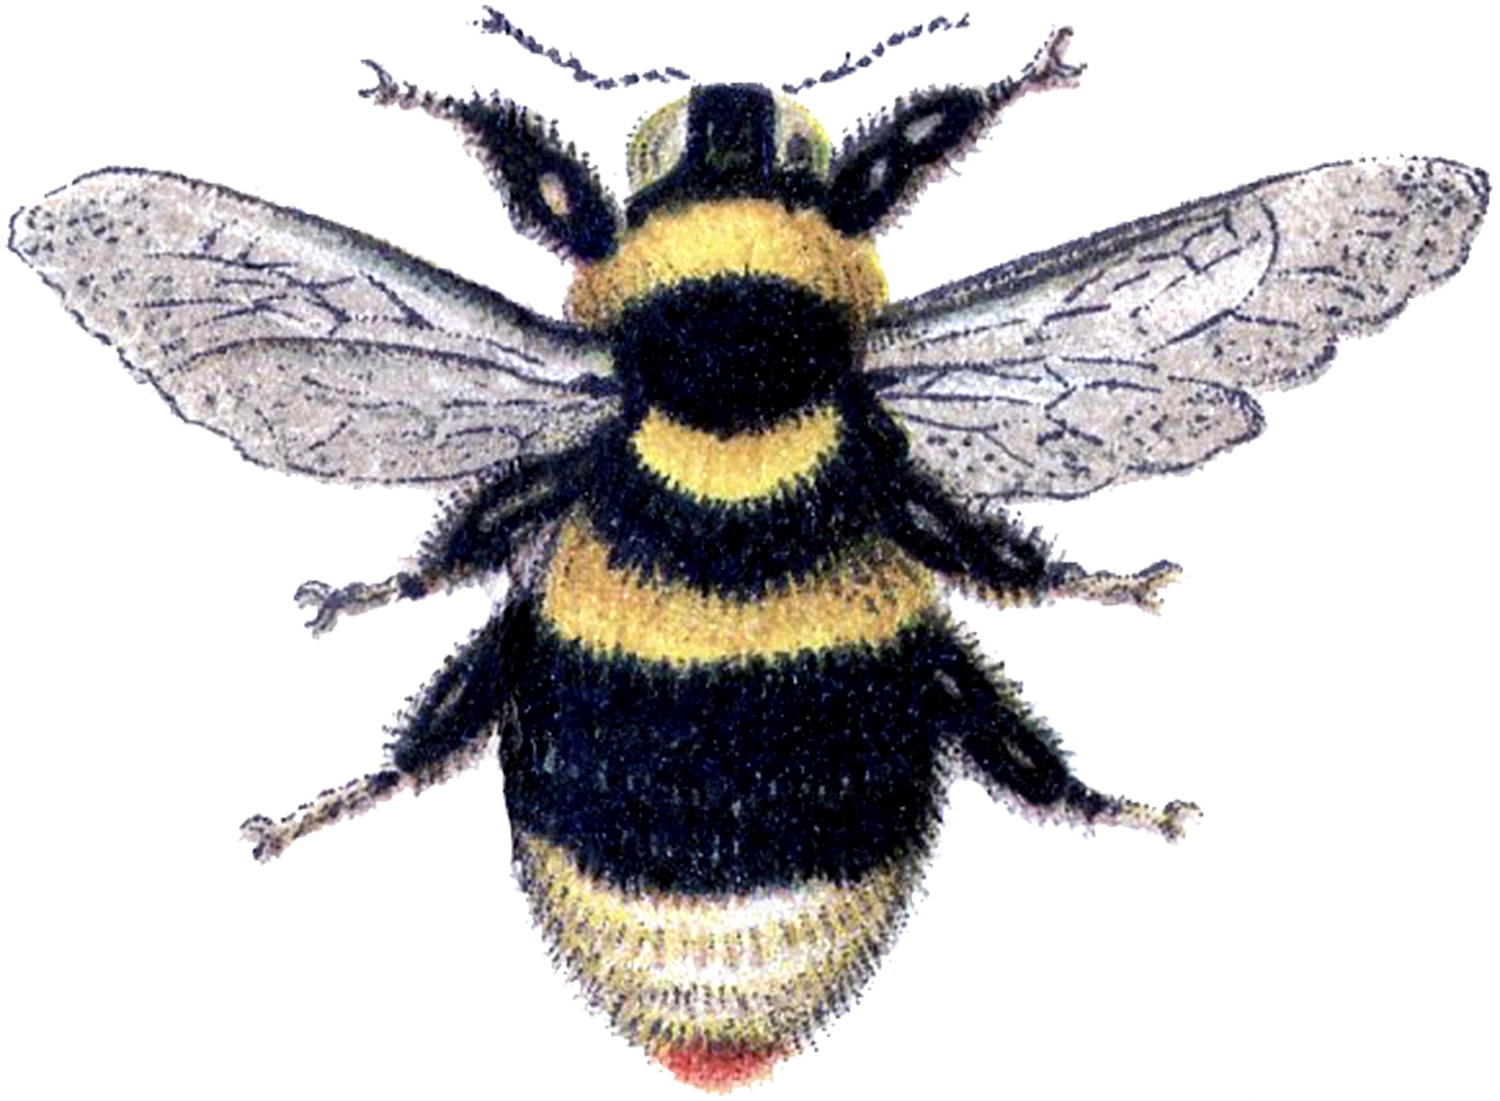 Bumble Bee Marvelous Bumblebee Image The Graphics Clipart